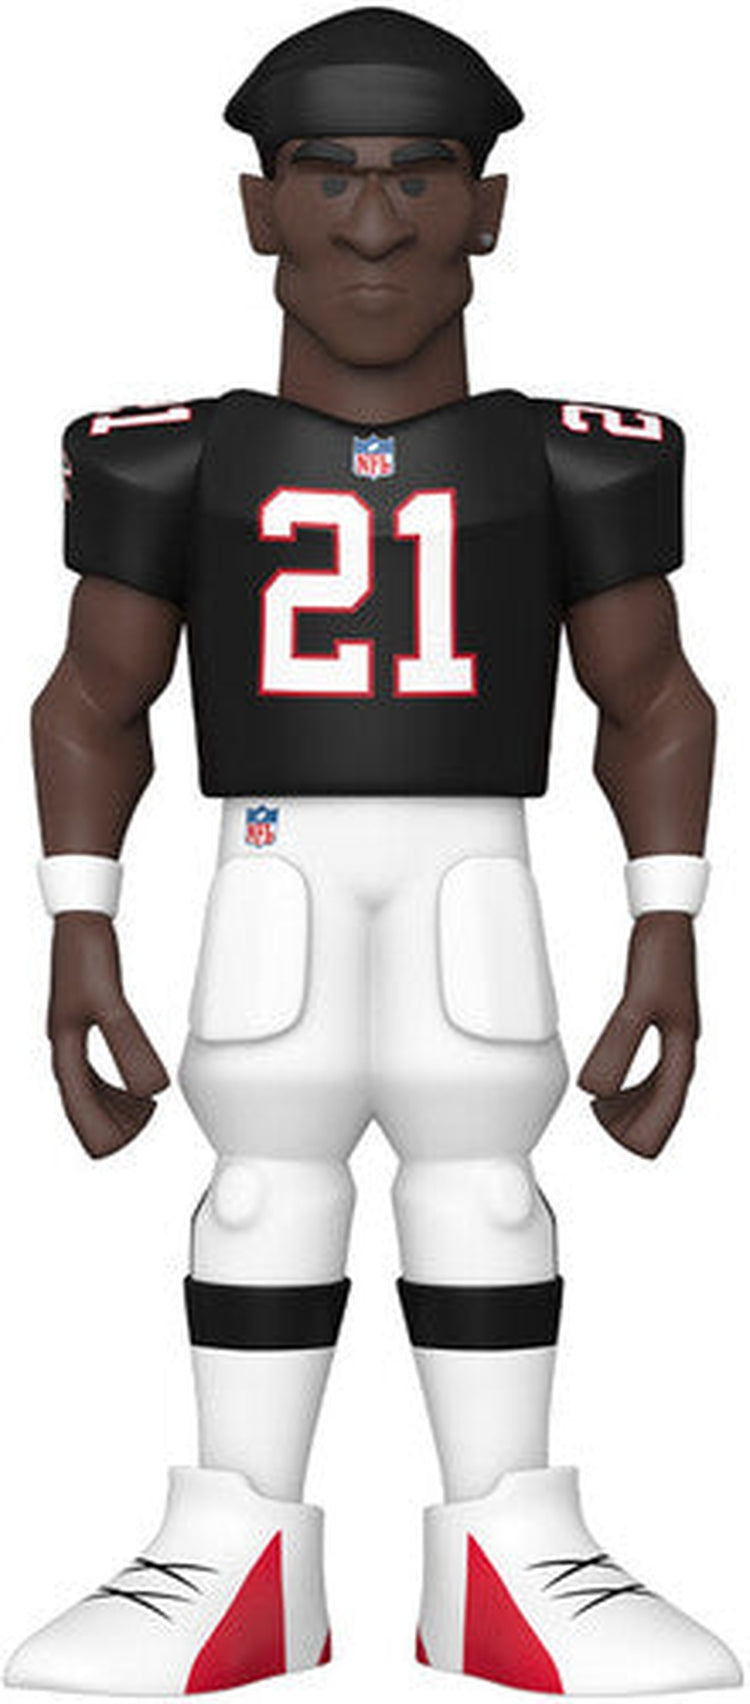 FUNKO GOLD 5 NFL LEGENDS: Falcons - Deion Sanders (Styles May Vary)